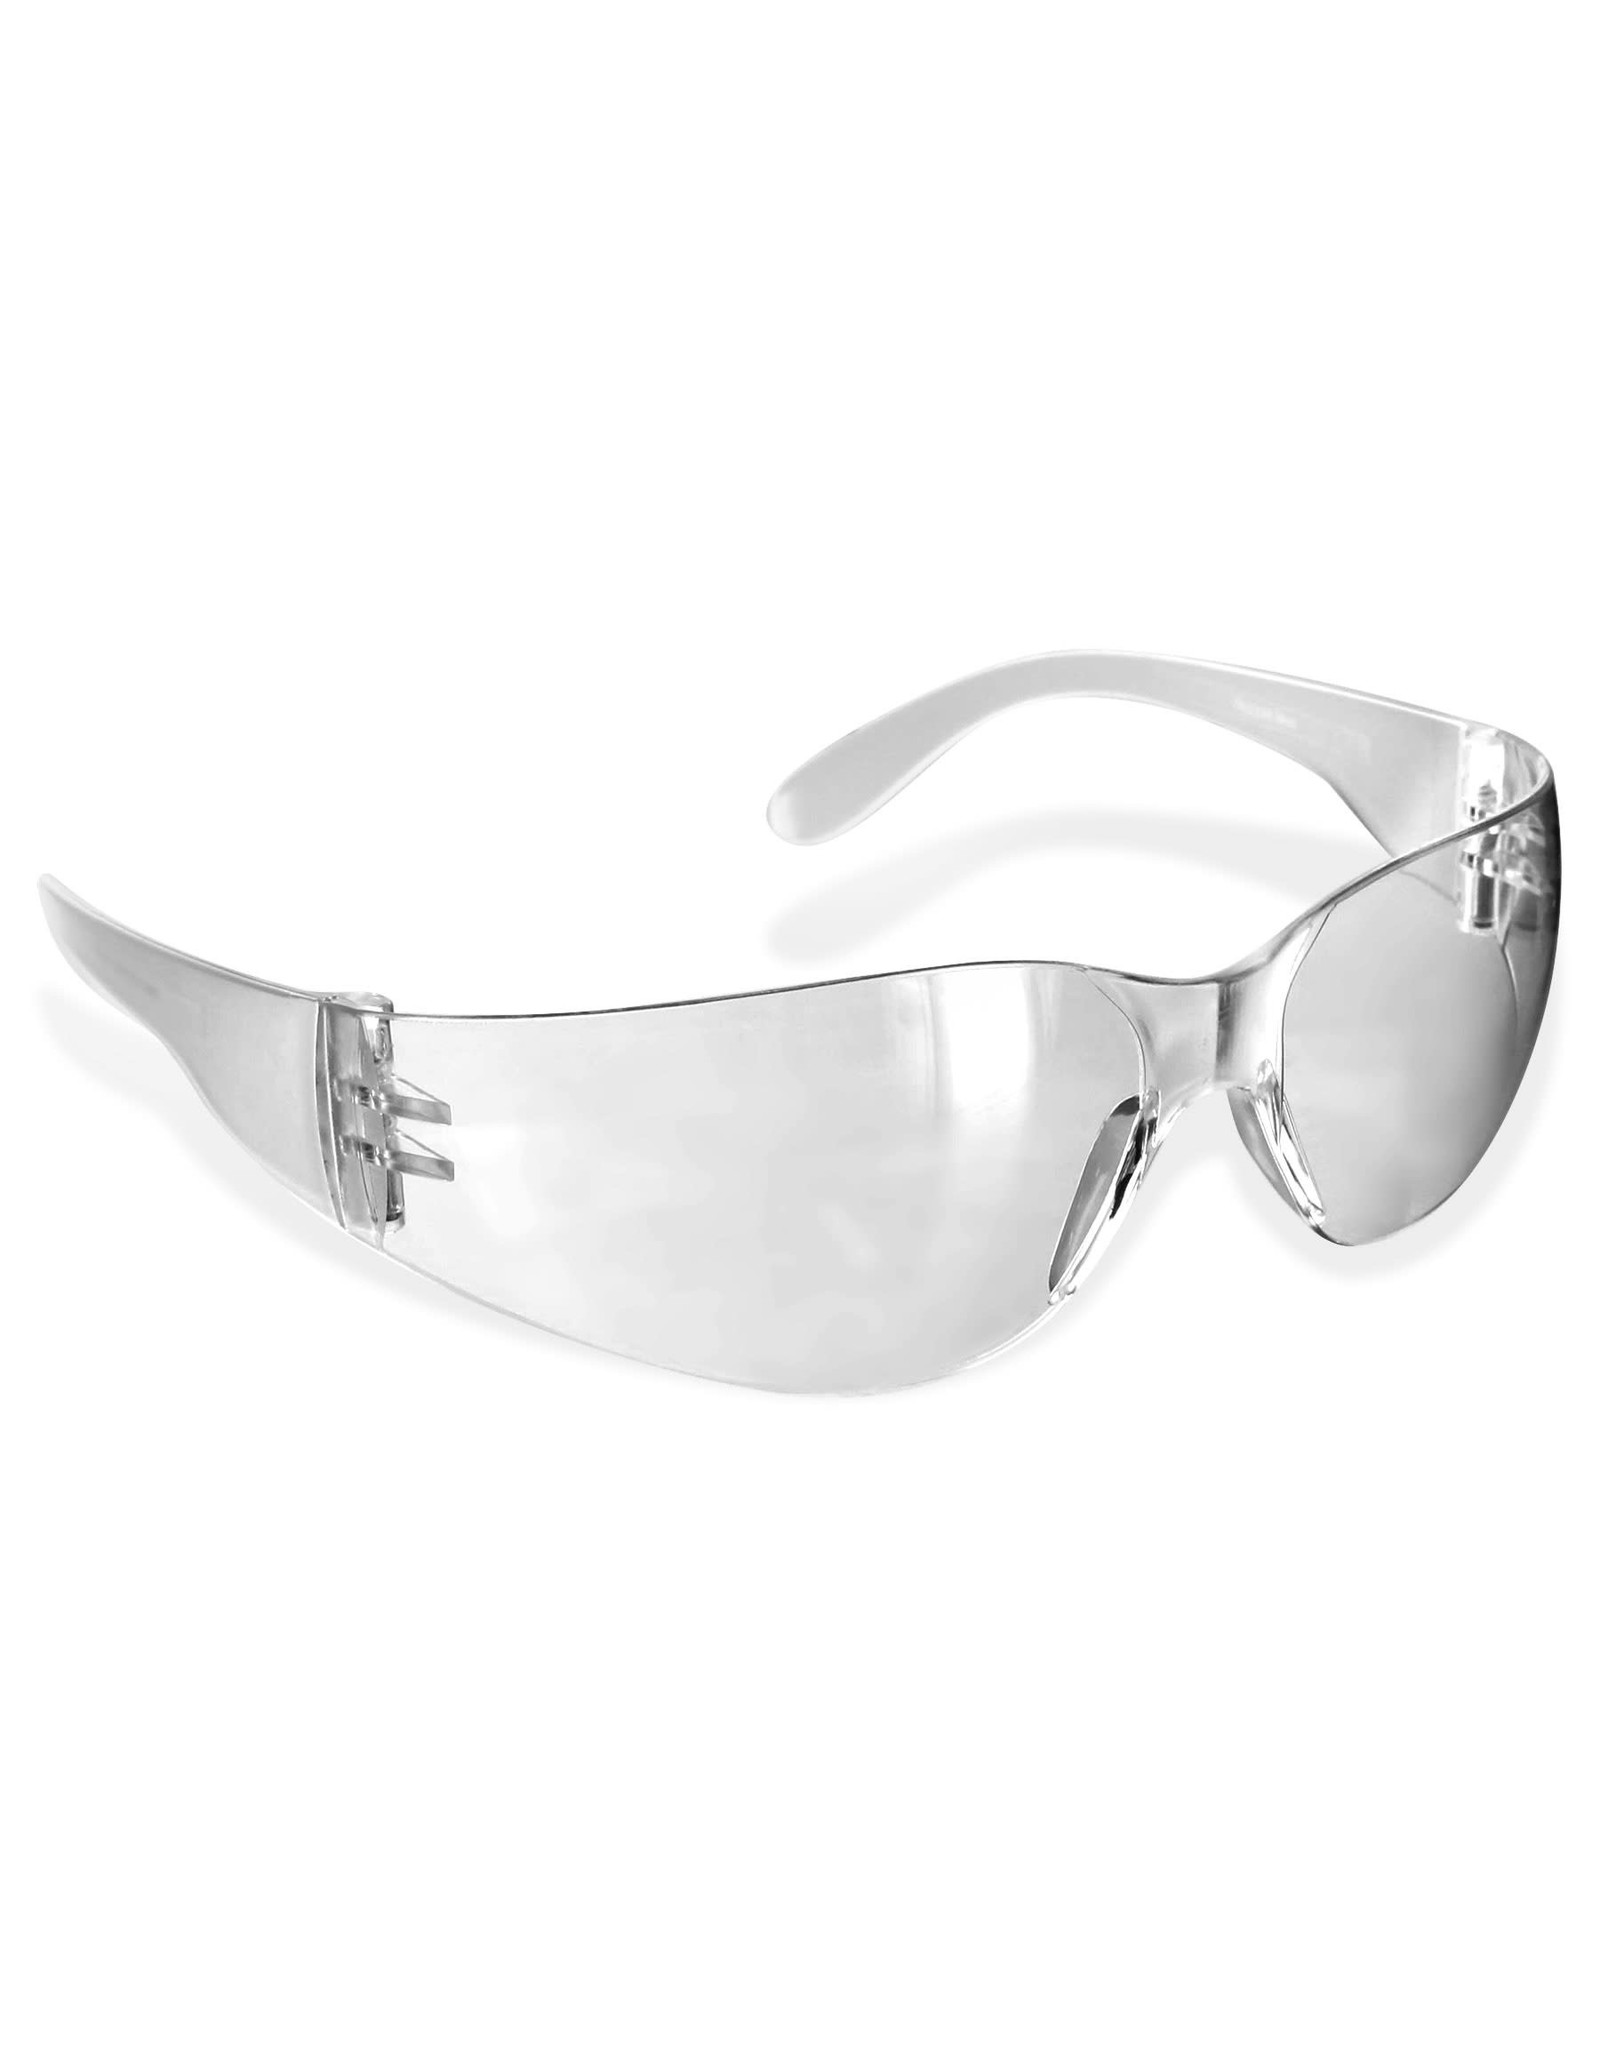 Rugged Blue Diablo Safety Glasses/Clear